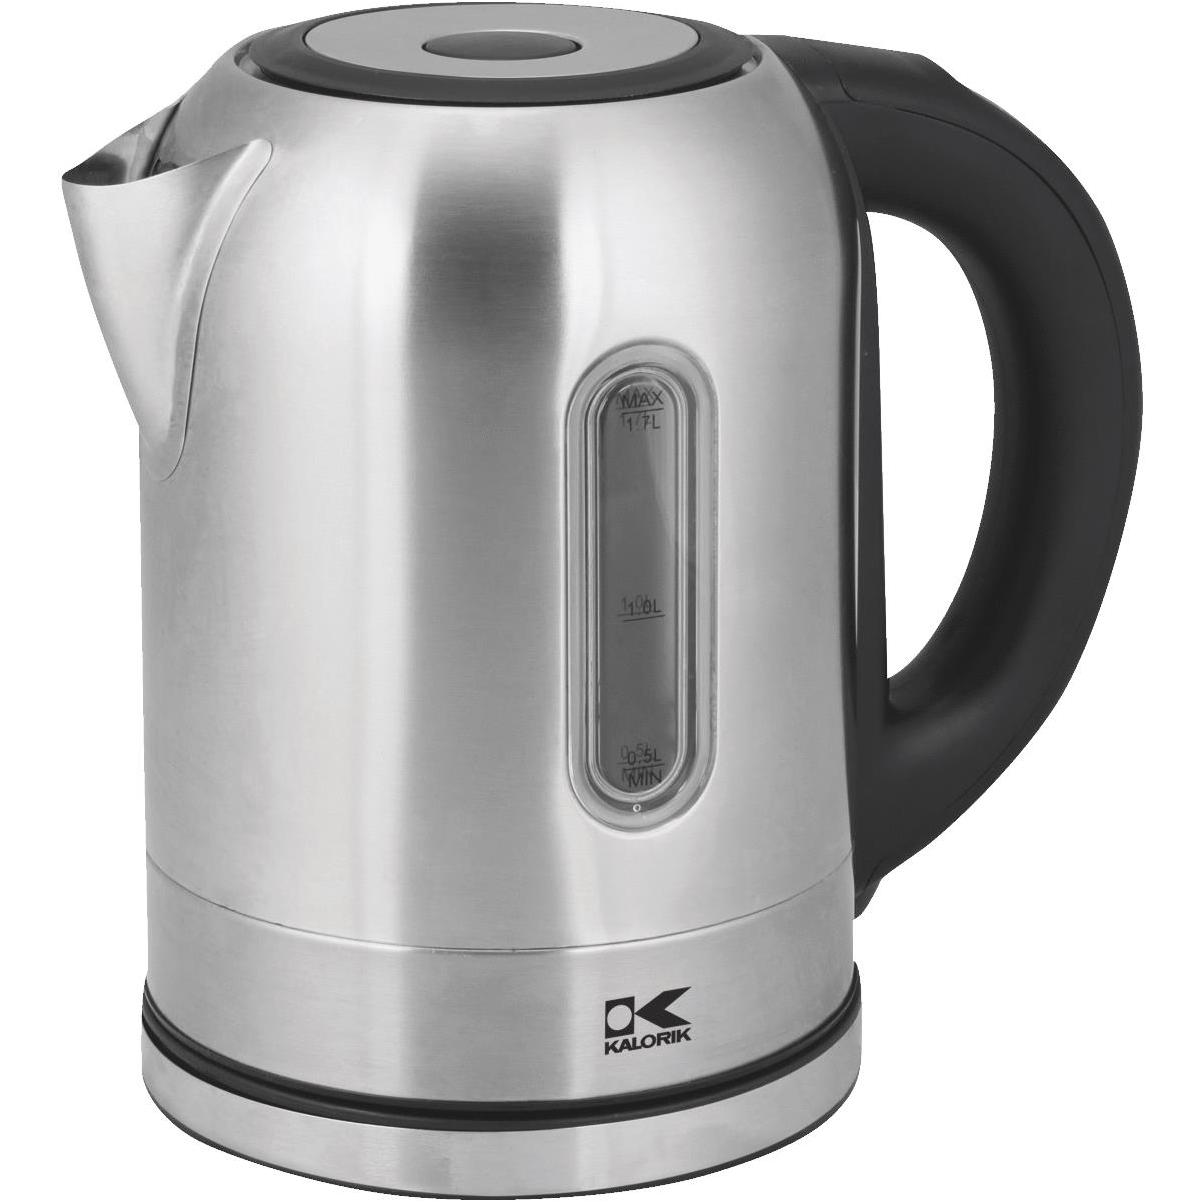 Kalorik 1.7L Stainless Steel Rapid Boil Electric Kettle with Blue LED